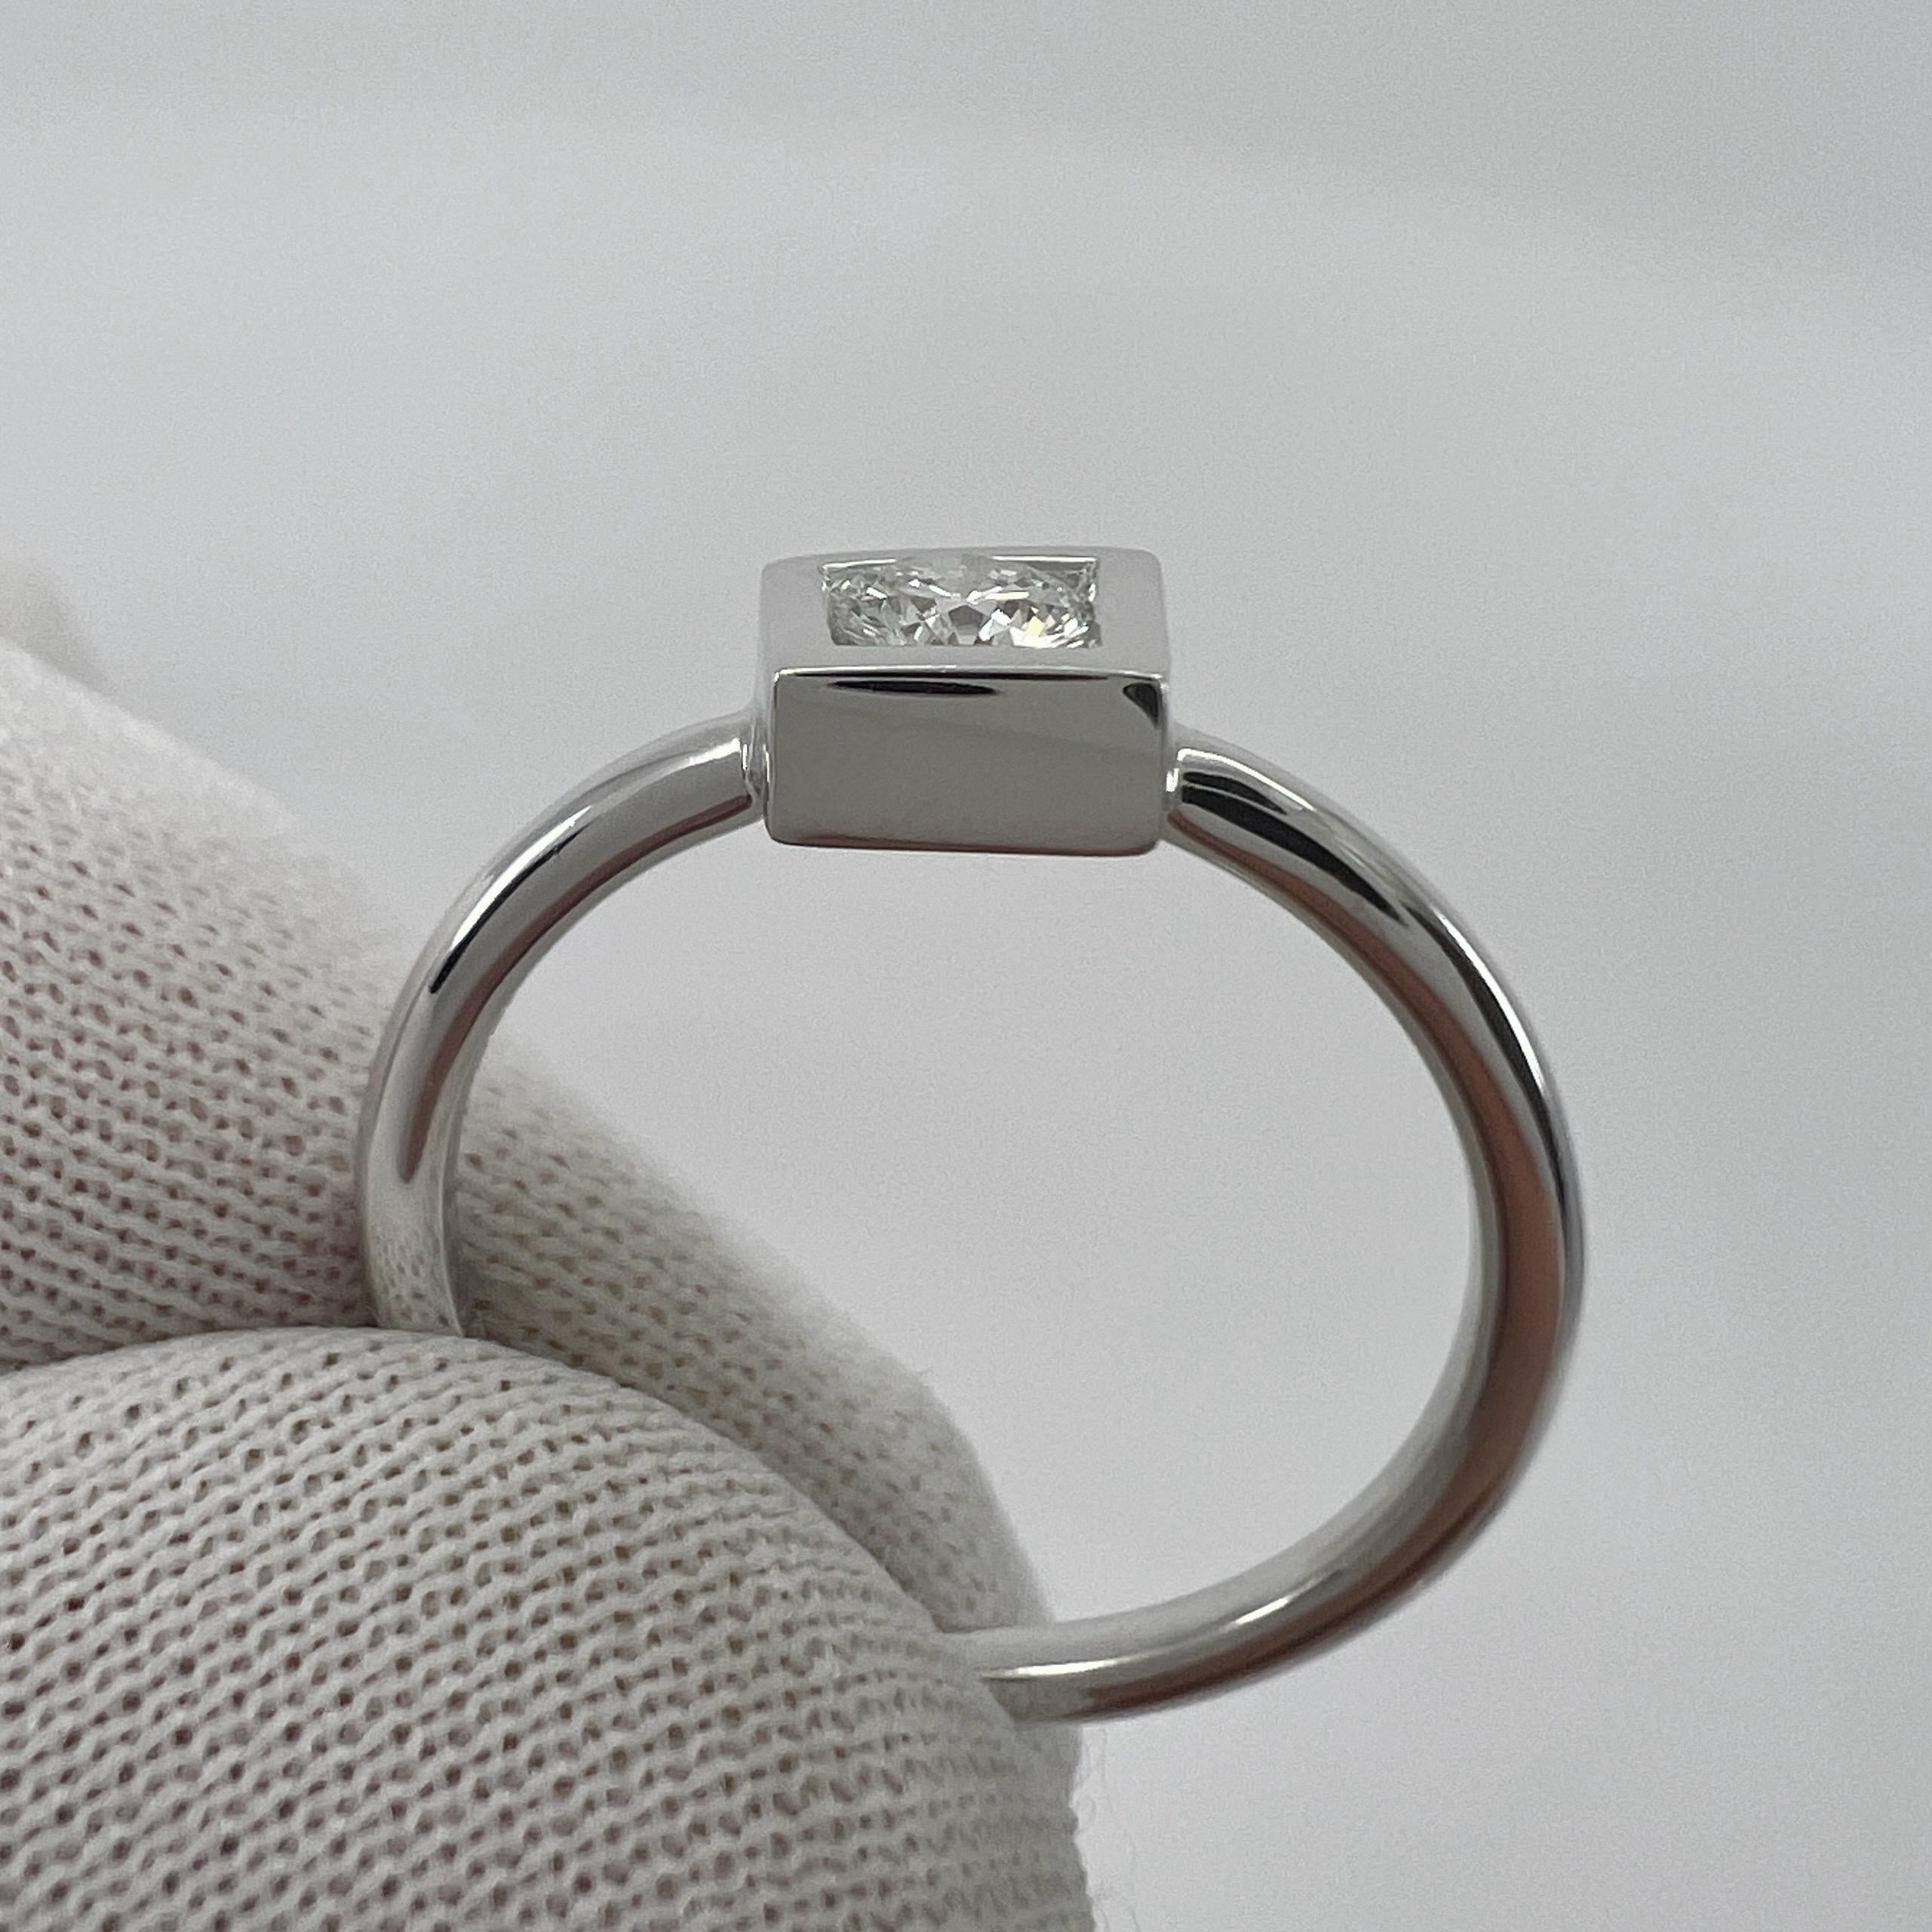 Rare Tiffany & Co Frank Gehry Torque Round Diamond 18k White Gold Solitaire Ring For Sale 2